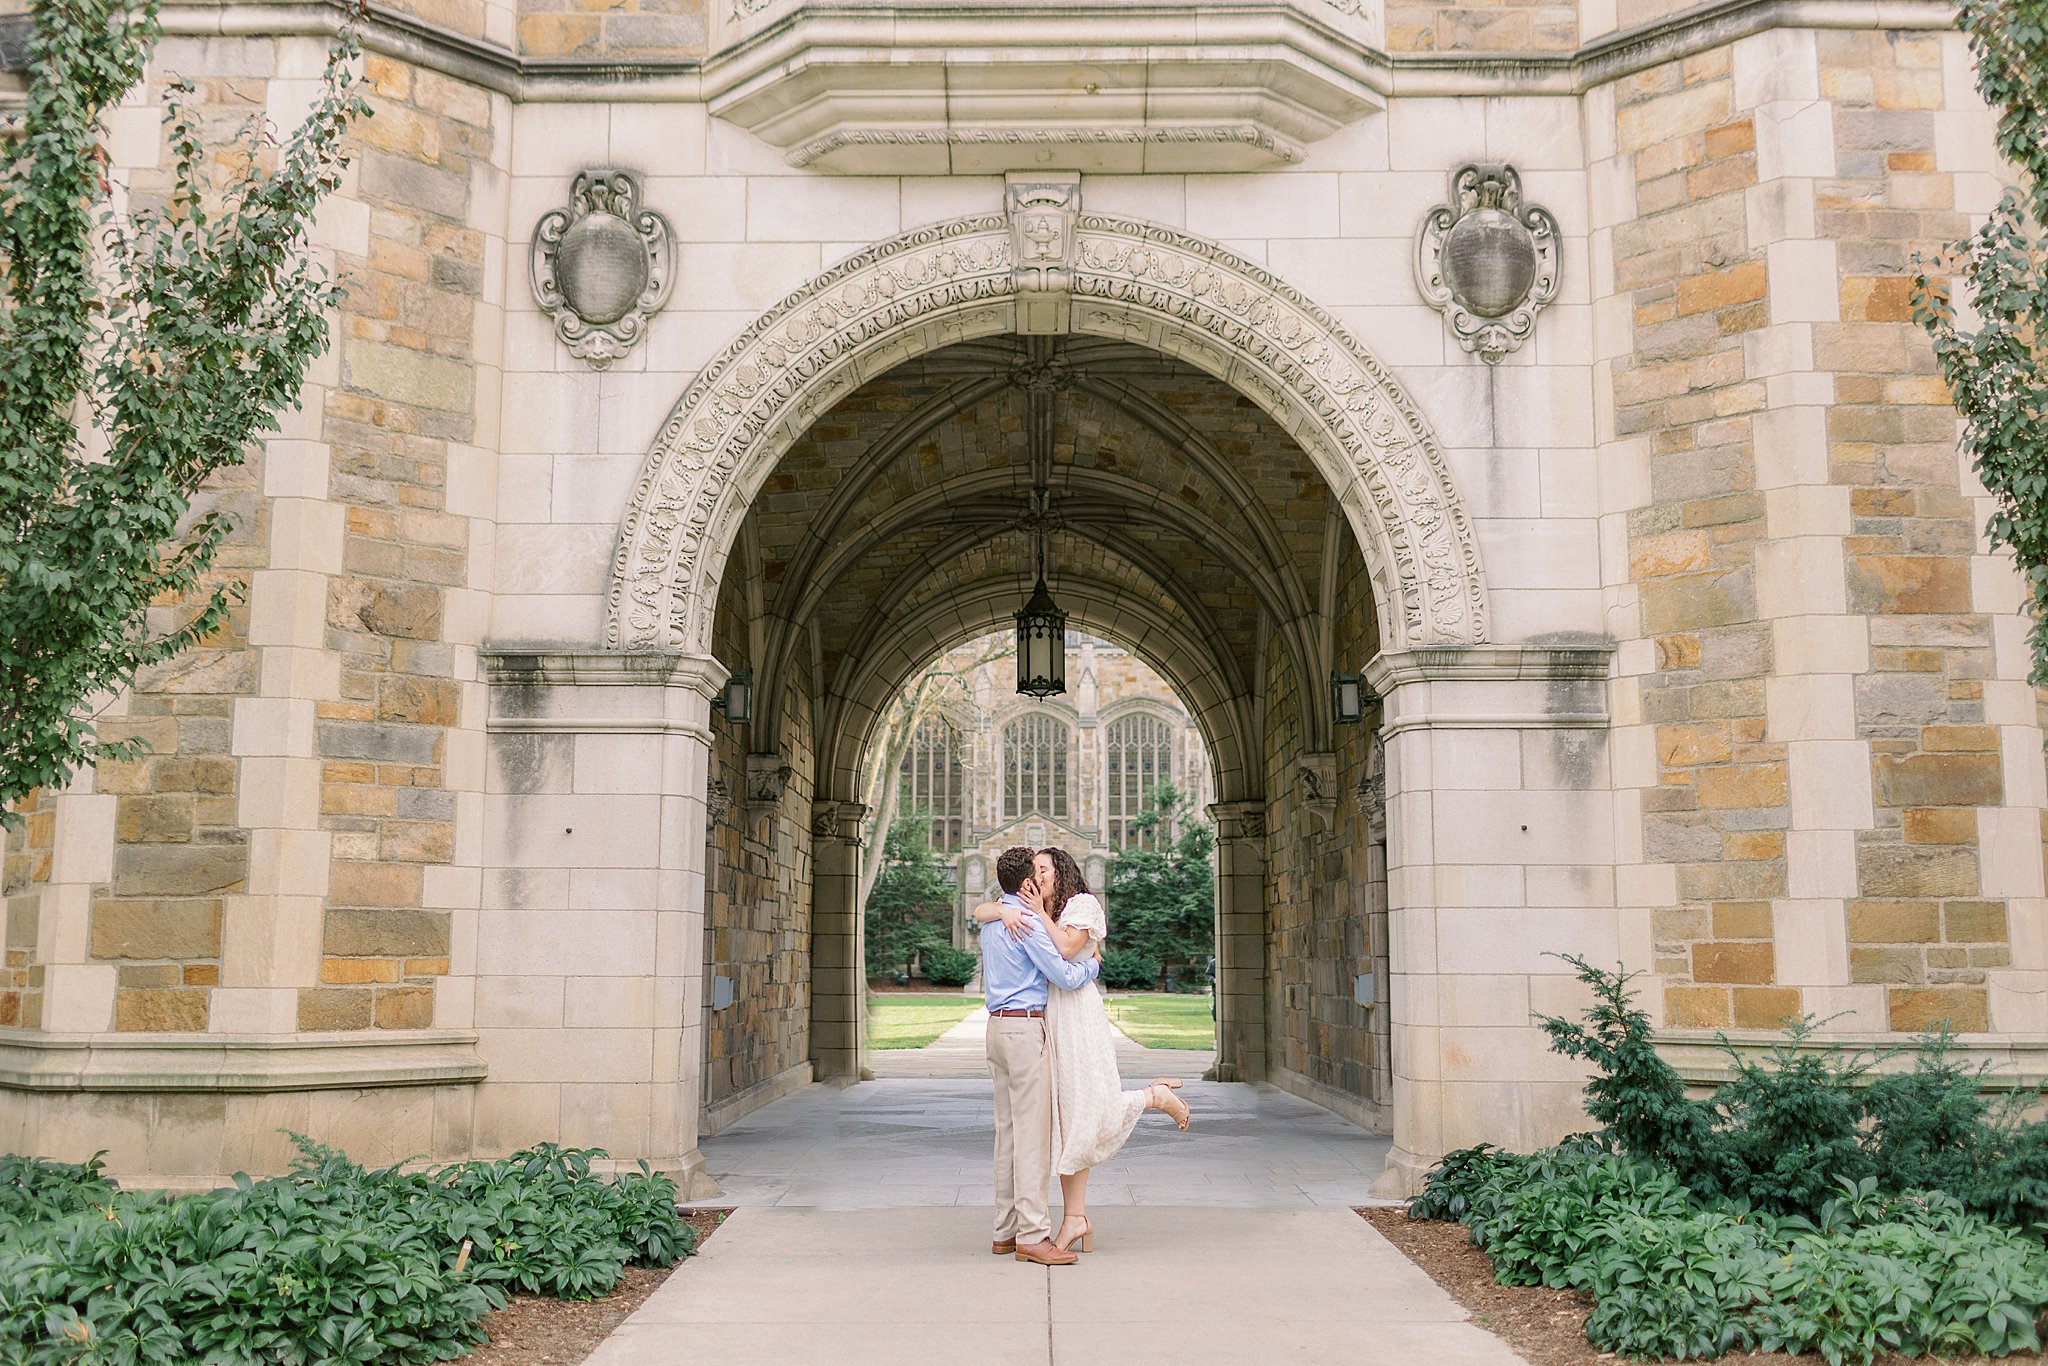 Fall-Engagement-Photos-at-TheUniversity-of-Michigan-Law-Quad-_0013